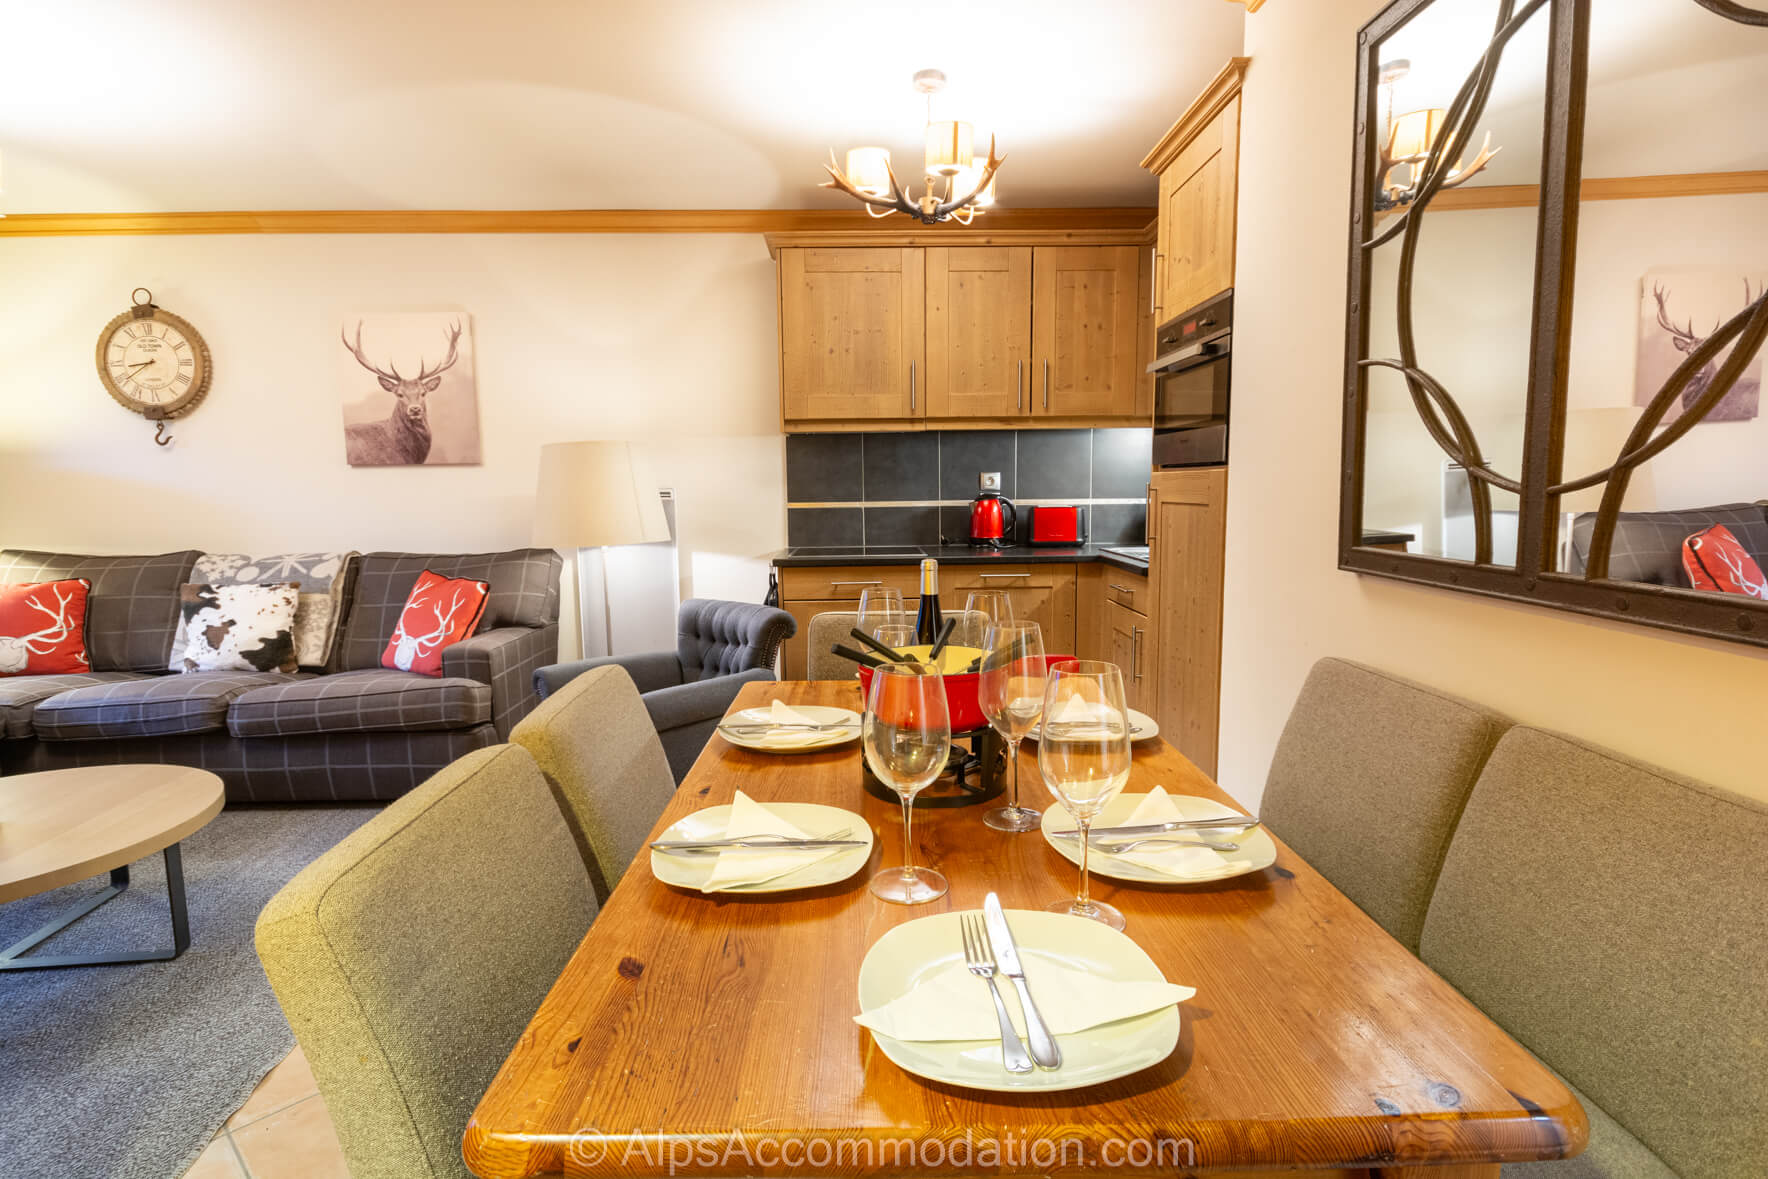 Chardons Argentes G6 Samoëns - Comfortable dining area with luxurious chairs